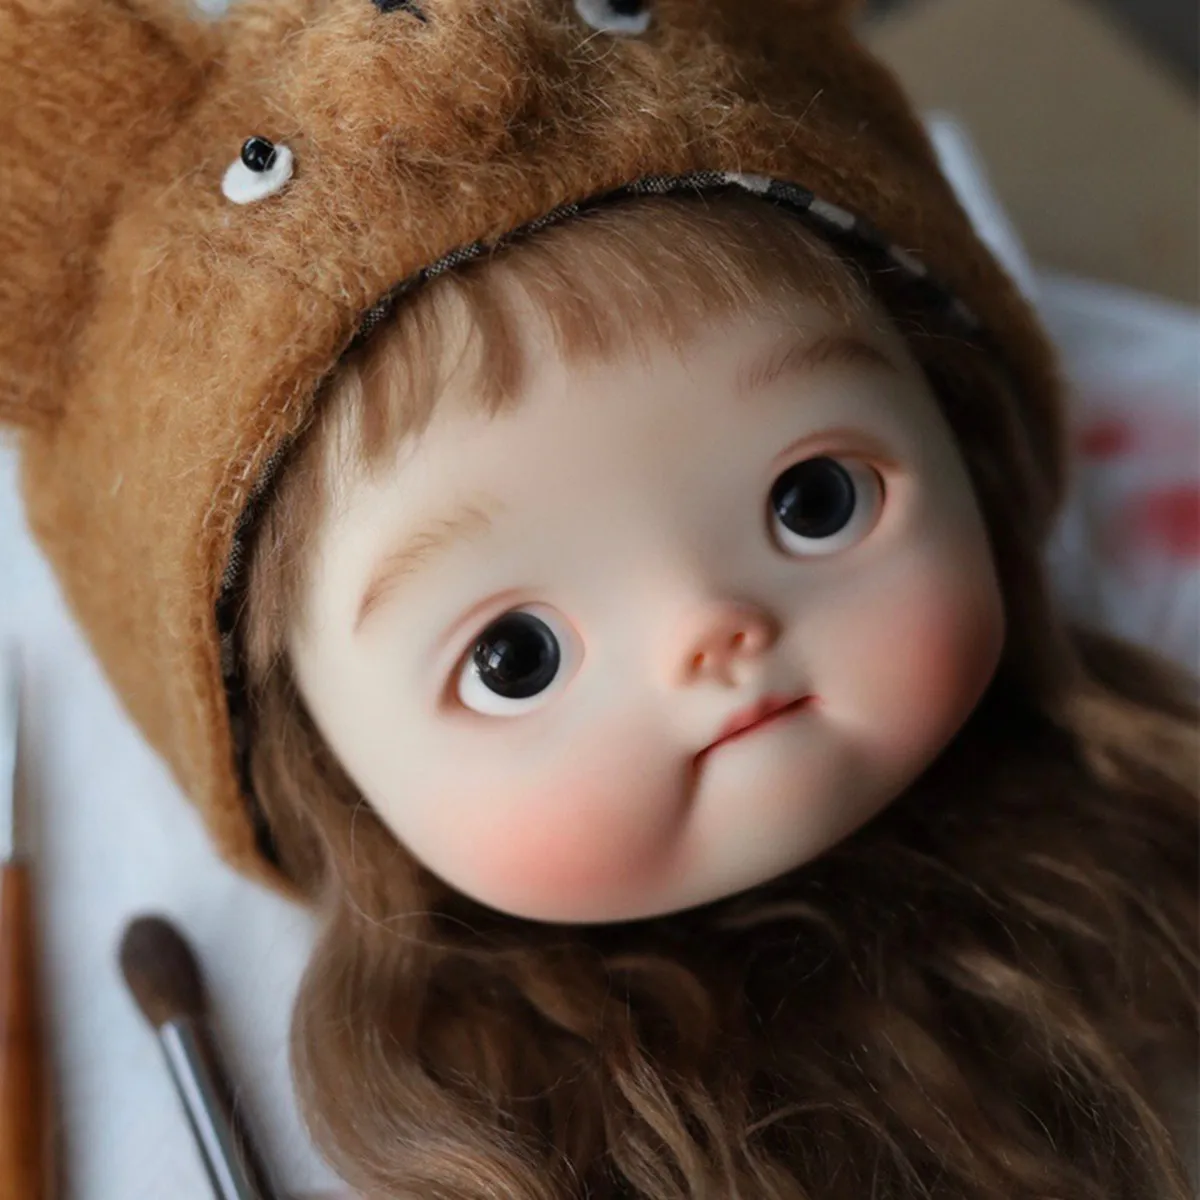 

New In stock diandian 1/8 sd BJD Doll Big Head Resin Material nude No Makeup DIY Accessories Child Toys Girl Gift